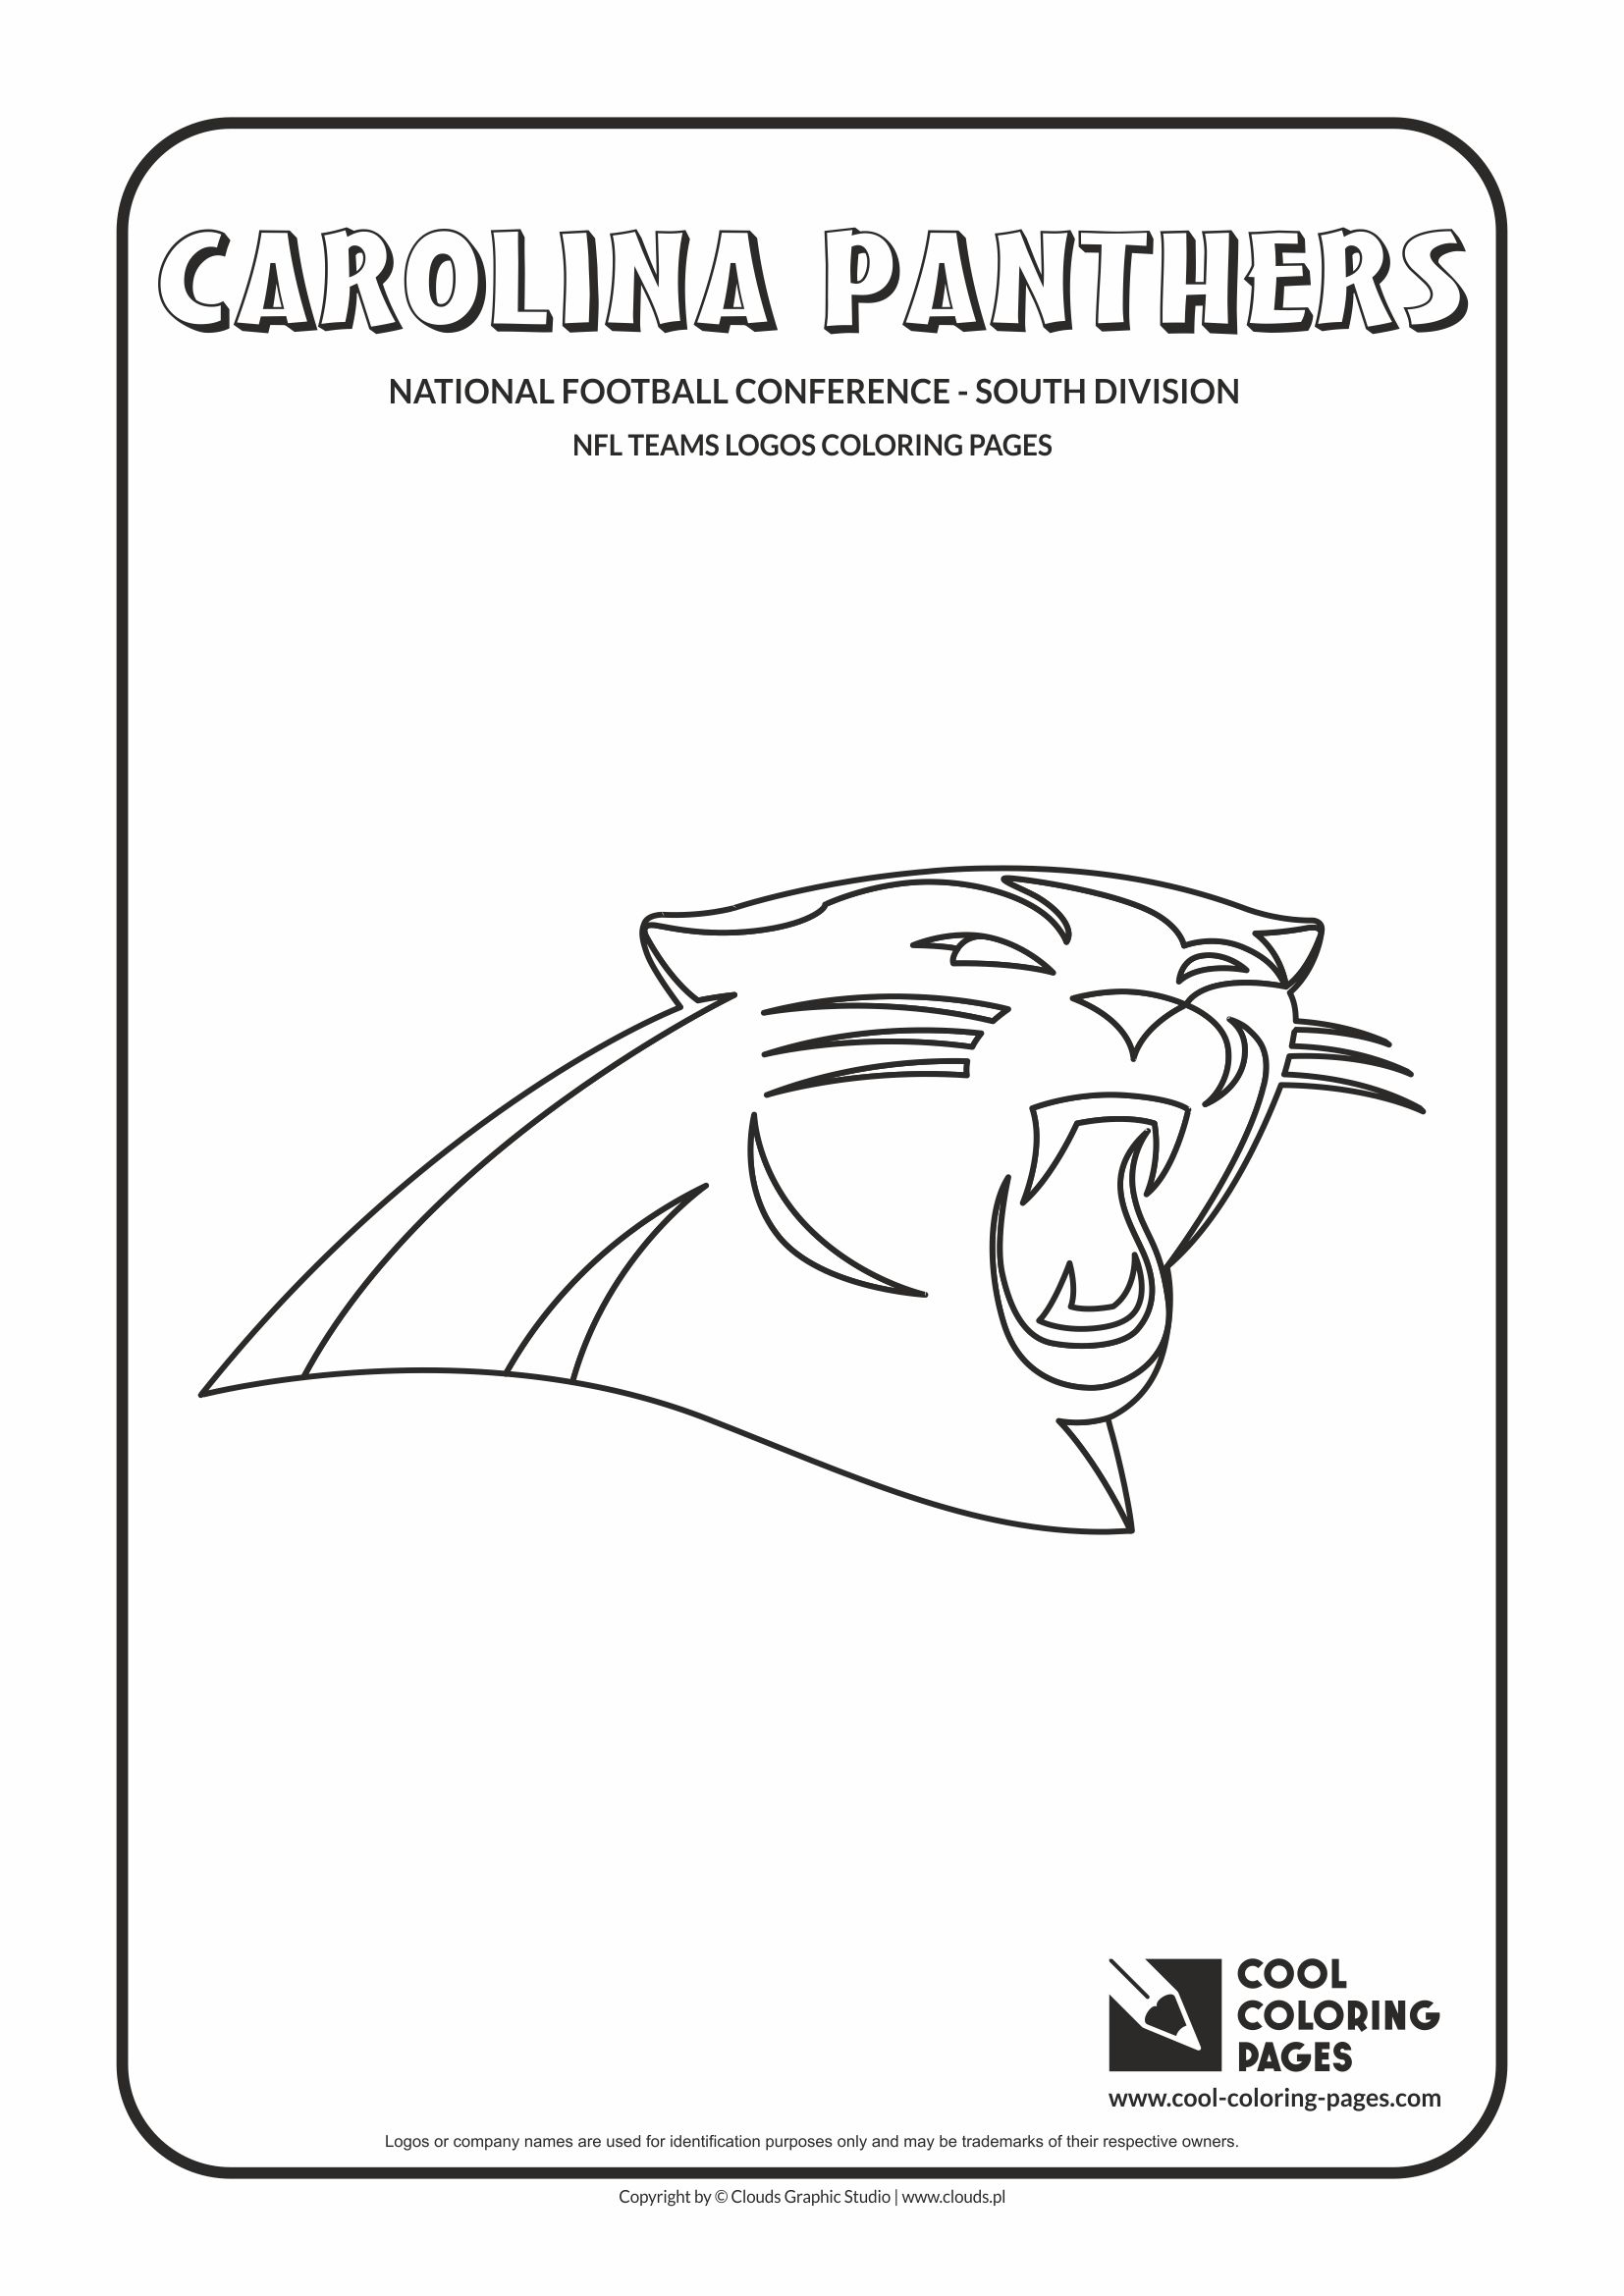 Cool Coloring Pages Carolina Panthers - NFL American football teams